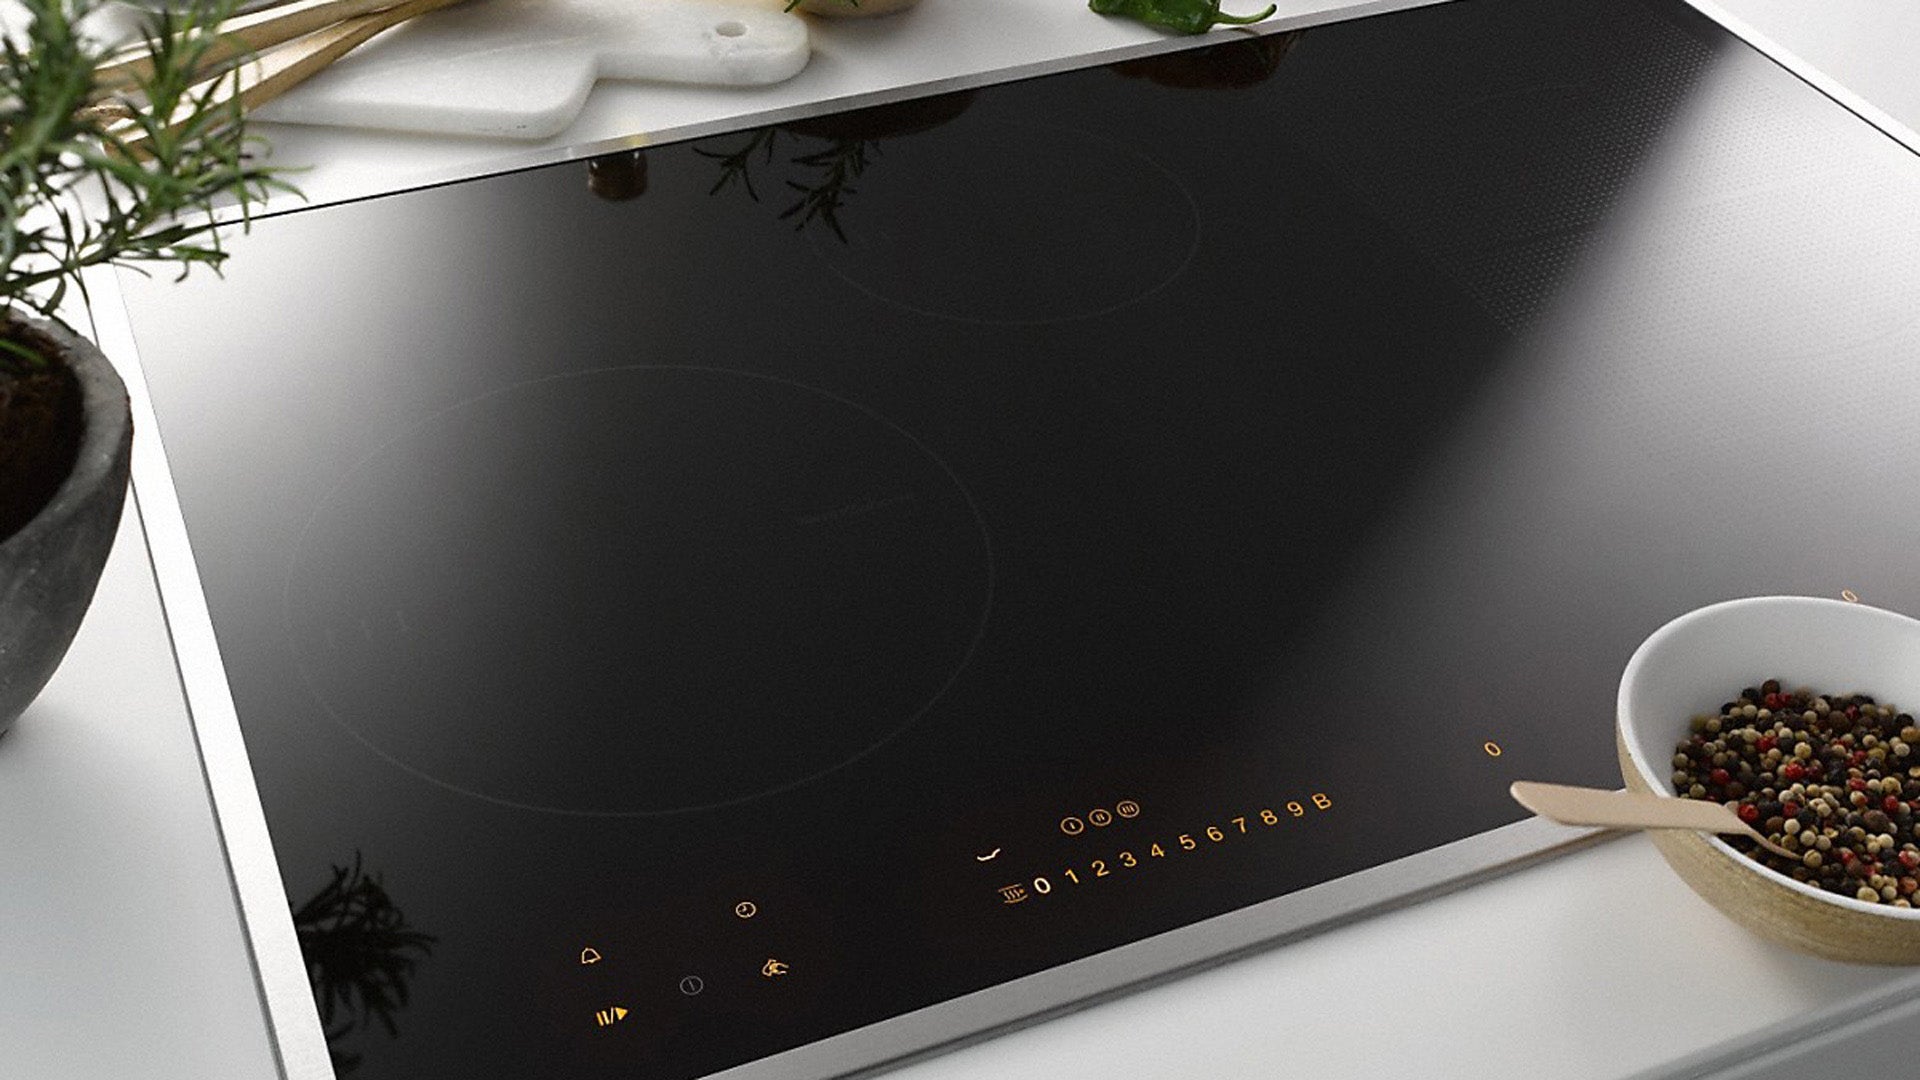 Best Miele Induction Cooktop reviews